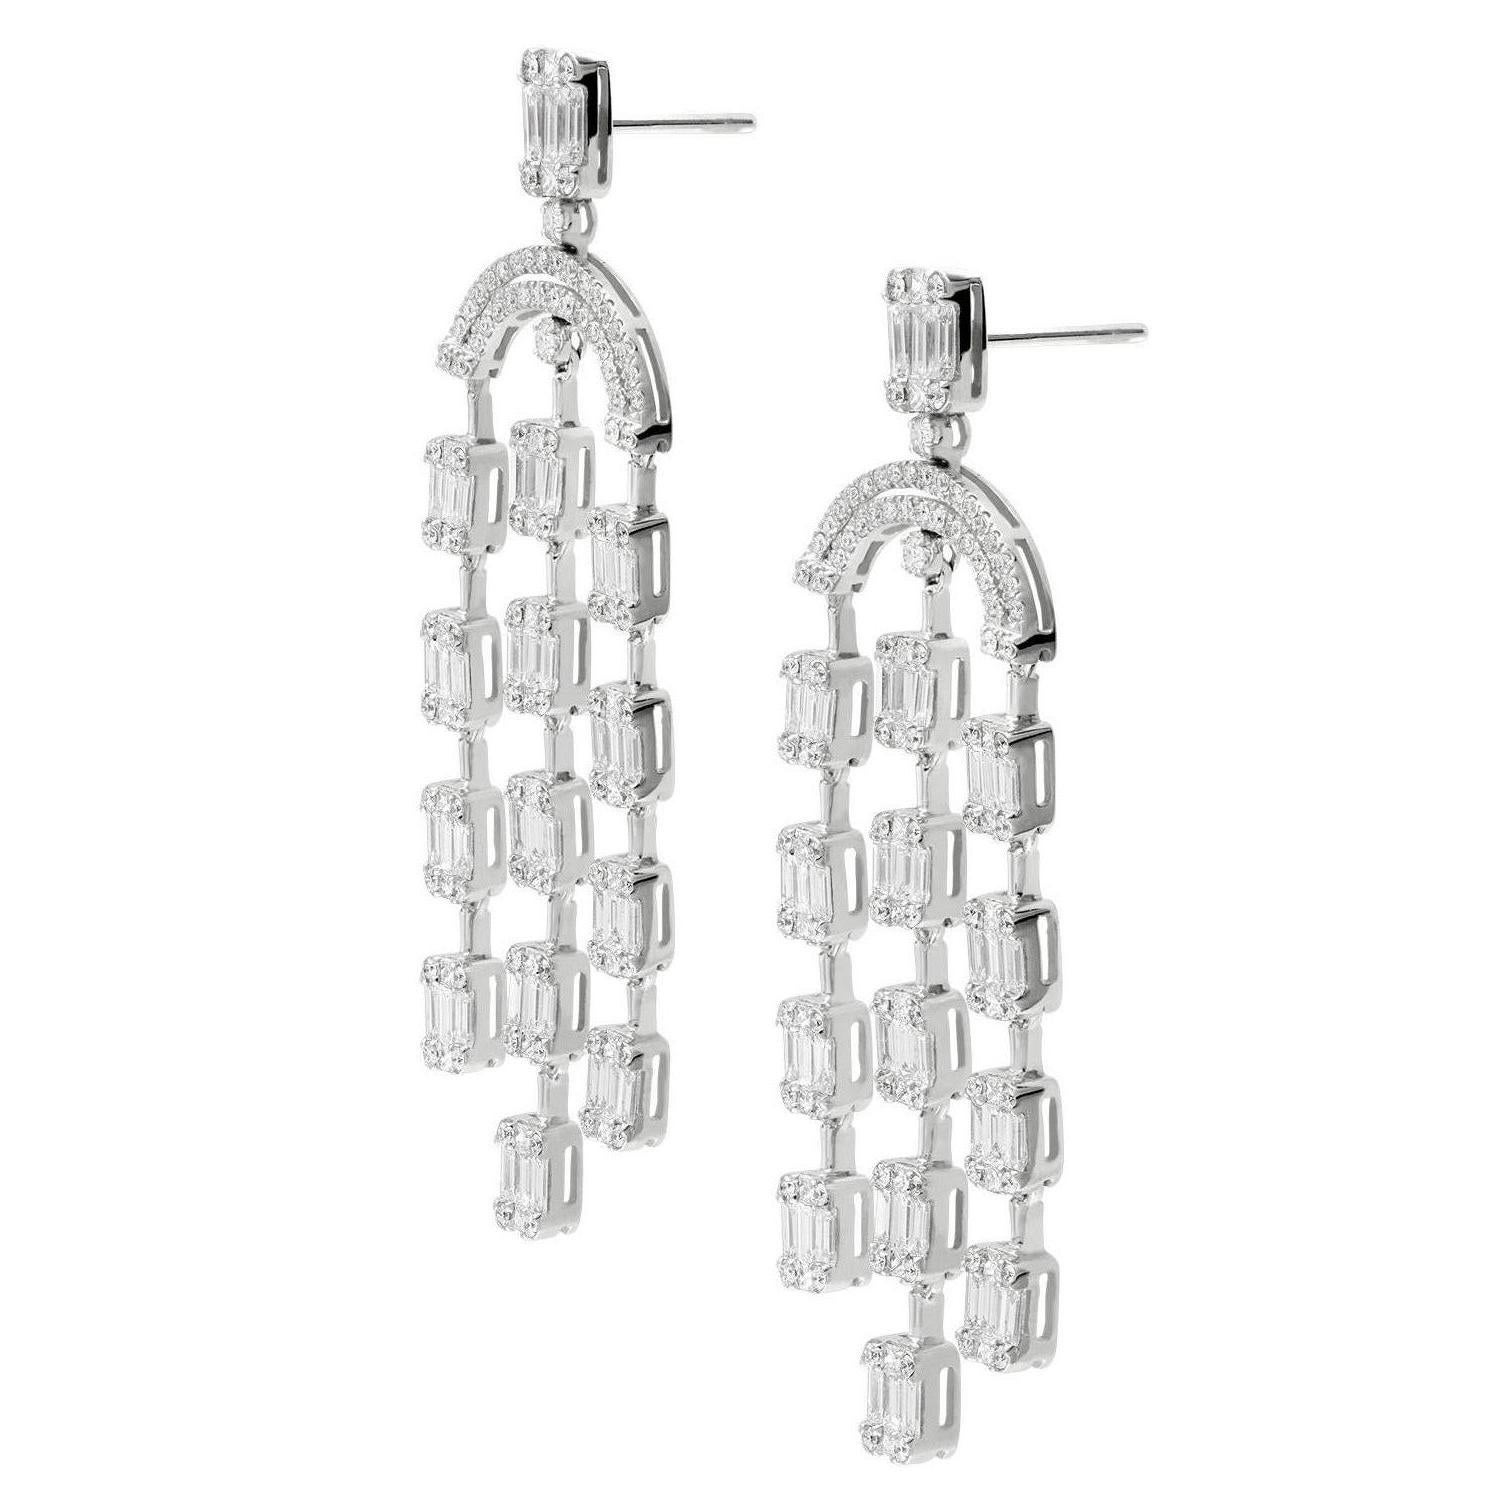 Baguette Cut 18 Karat White Gold Chandelier Earrings with Round Brilliants and Baguettes